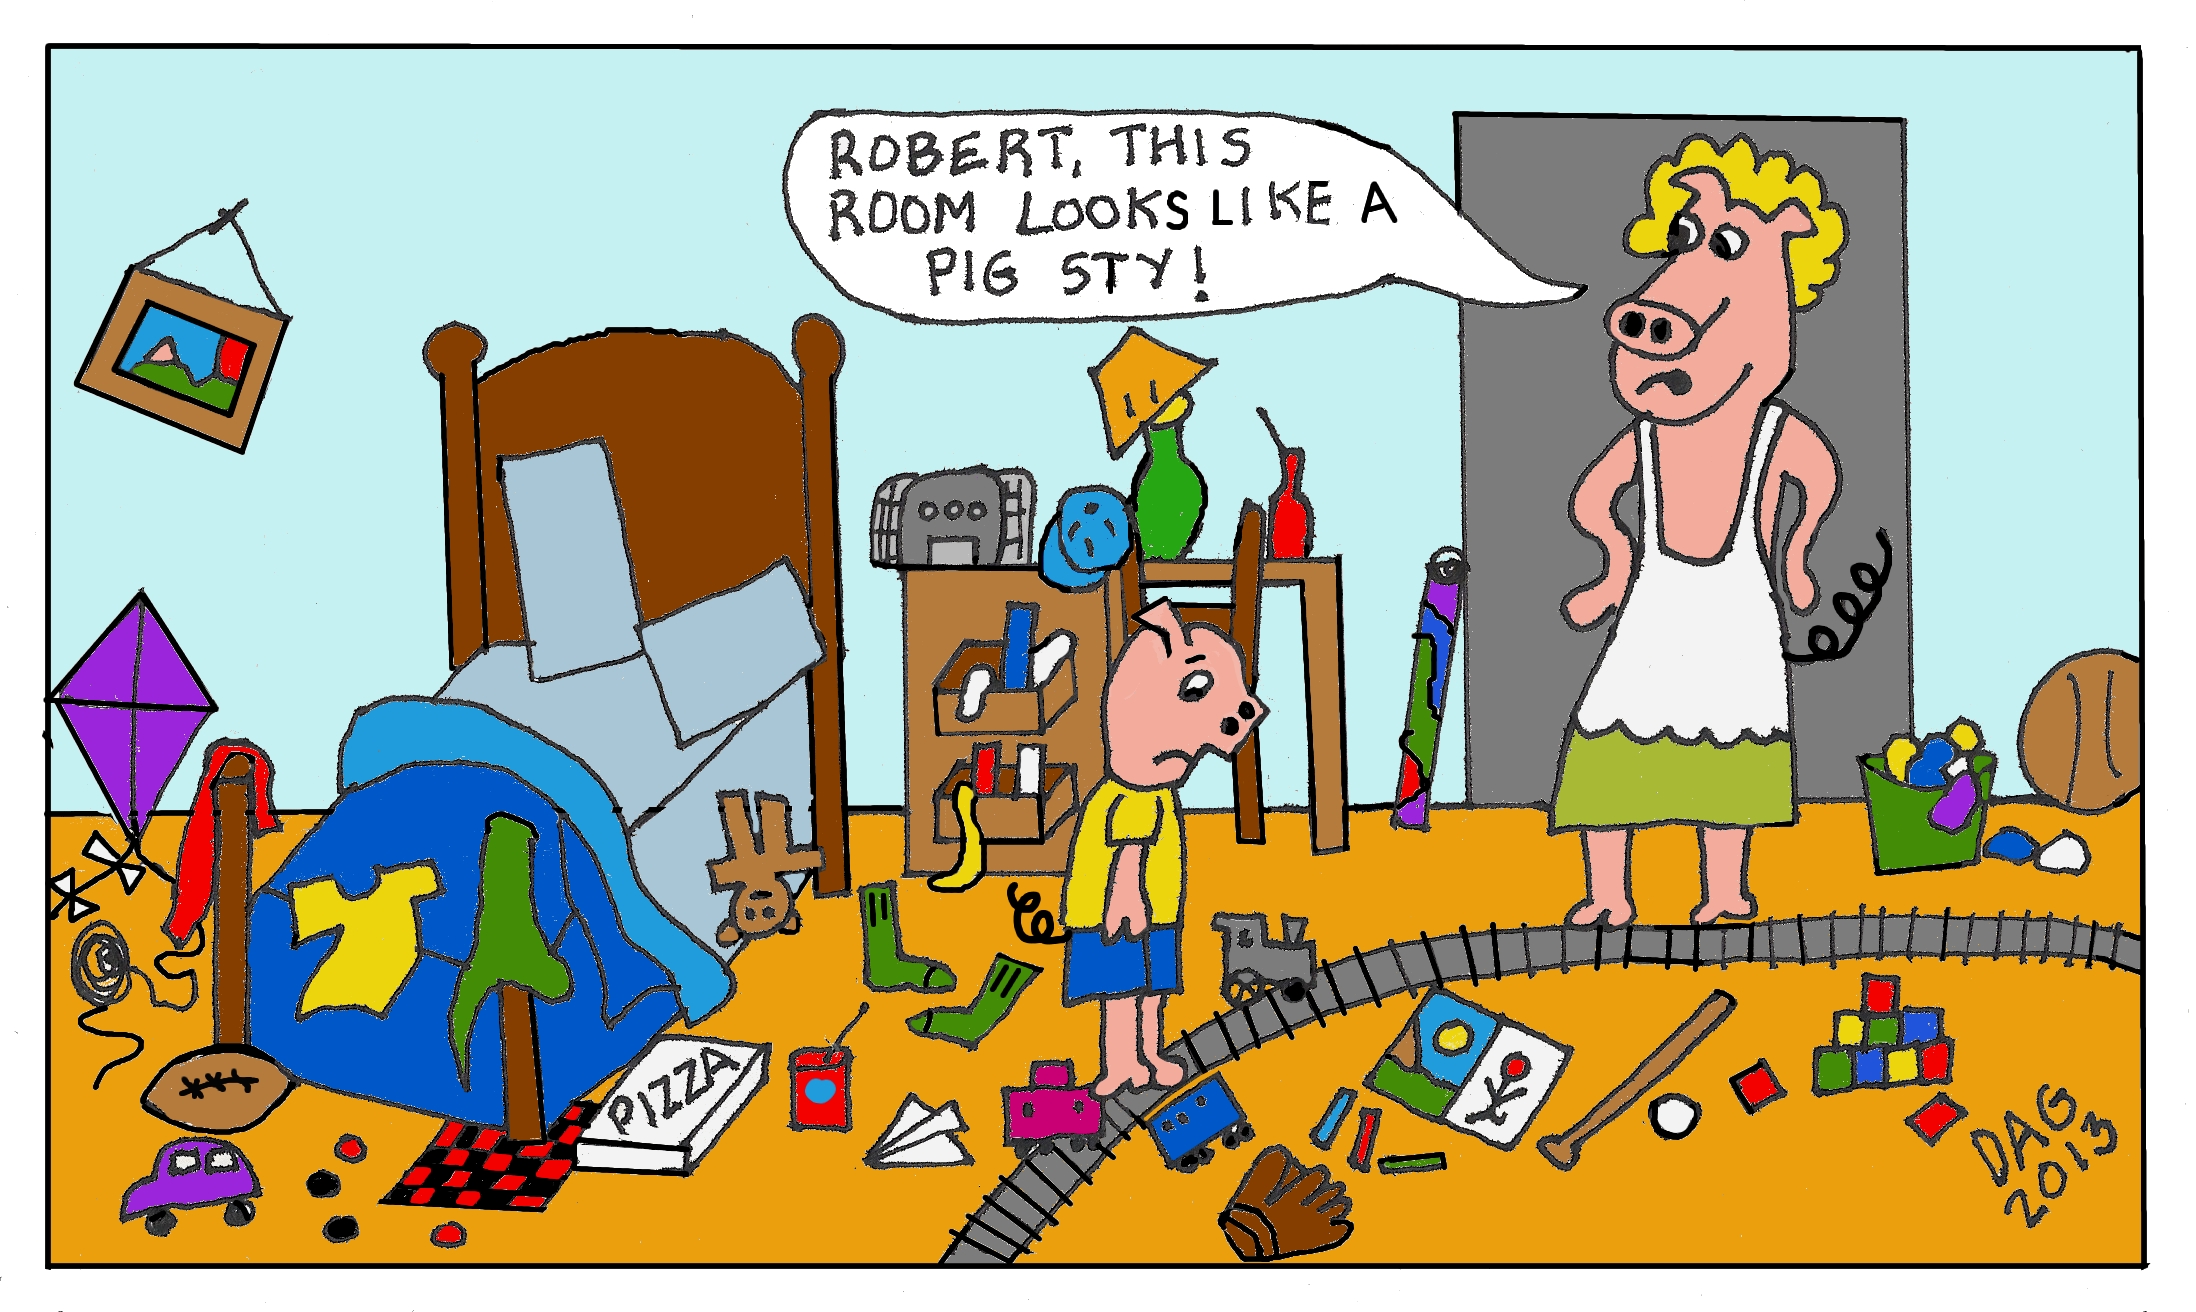 Tidies his room. Tidy Room and messy Room. Tidy Room cartoon. Clean your Room. To tidy the Room.